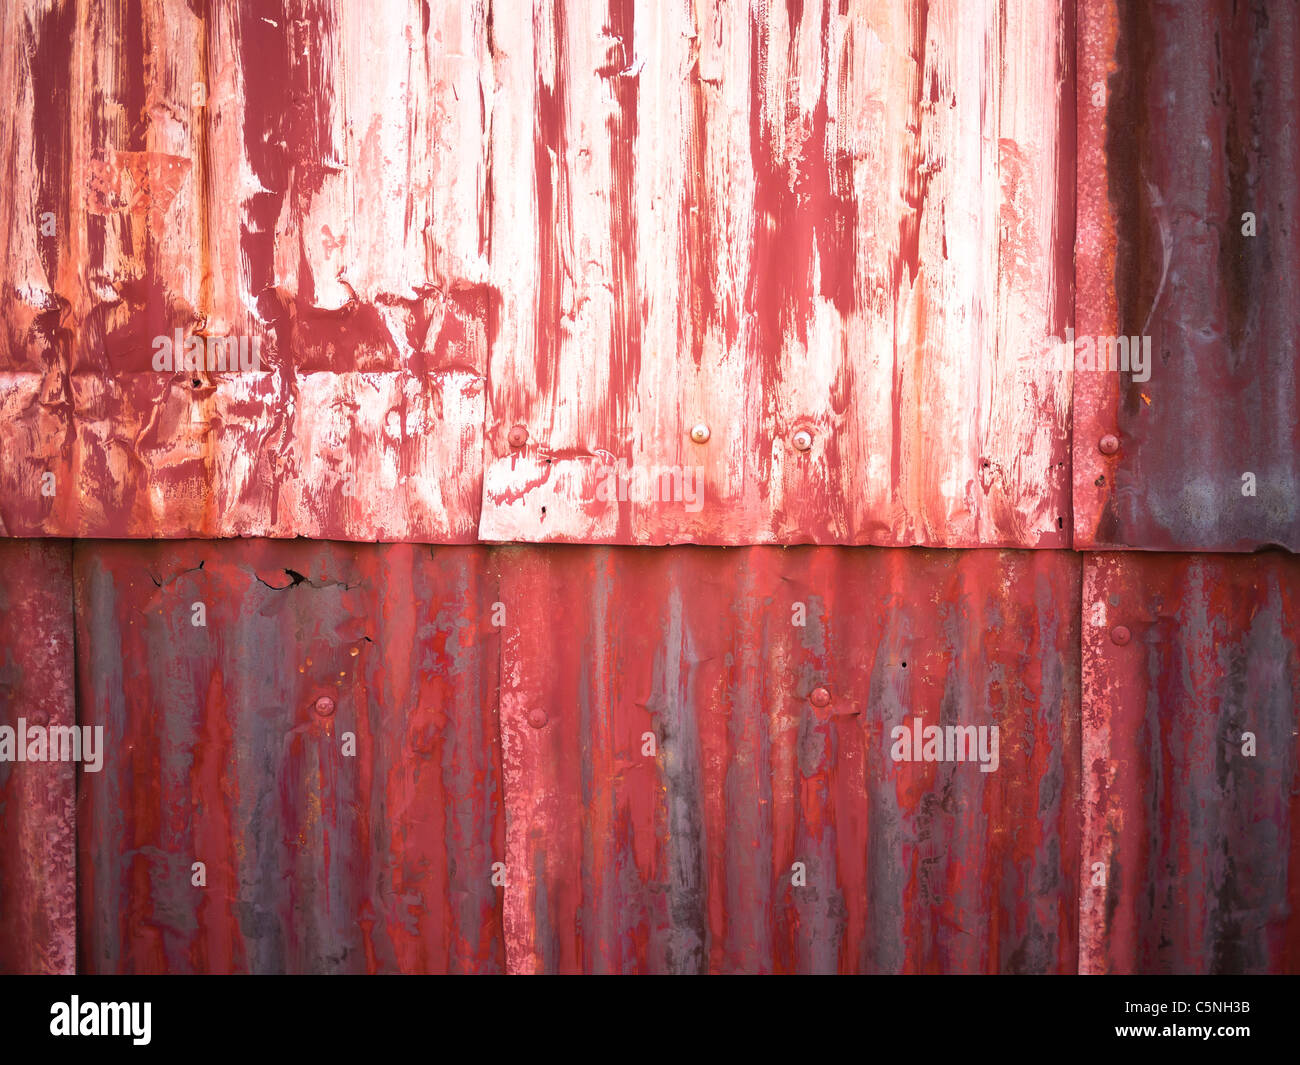 Rusty metal texture with old zinc wall. Stock Photo